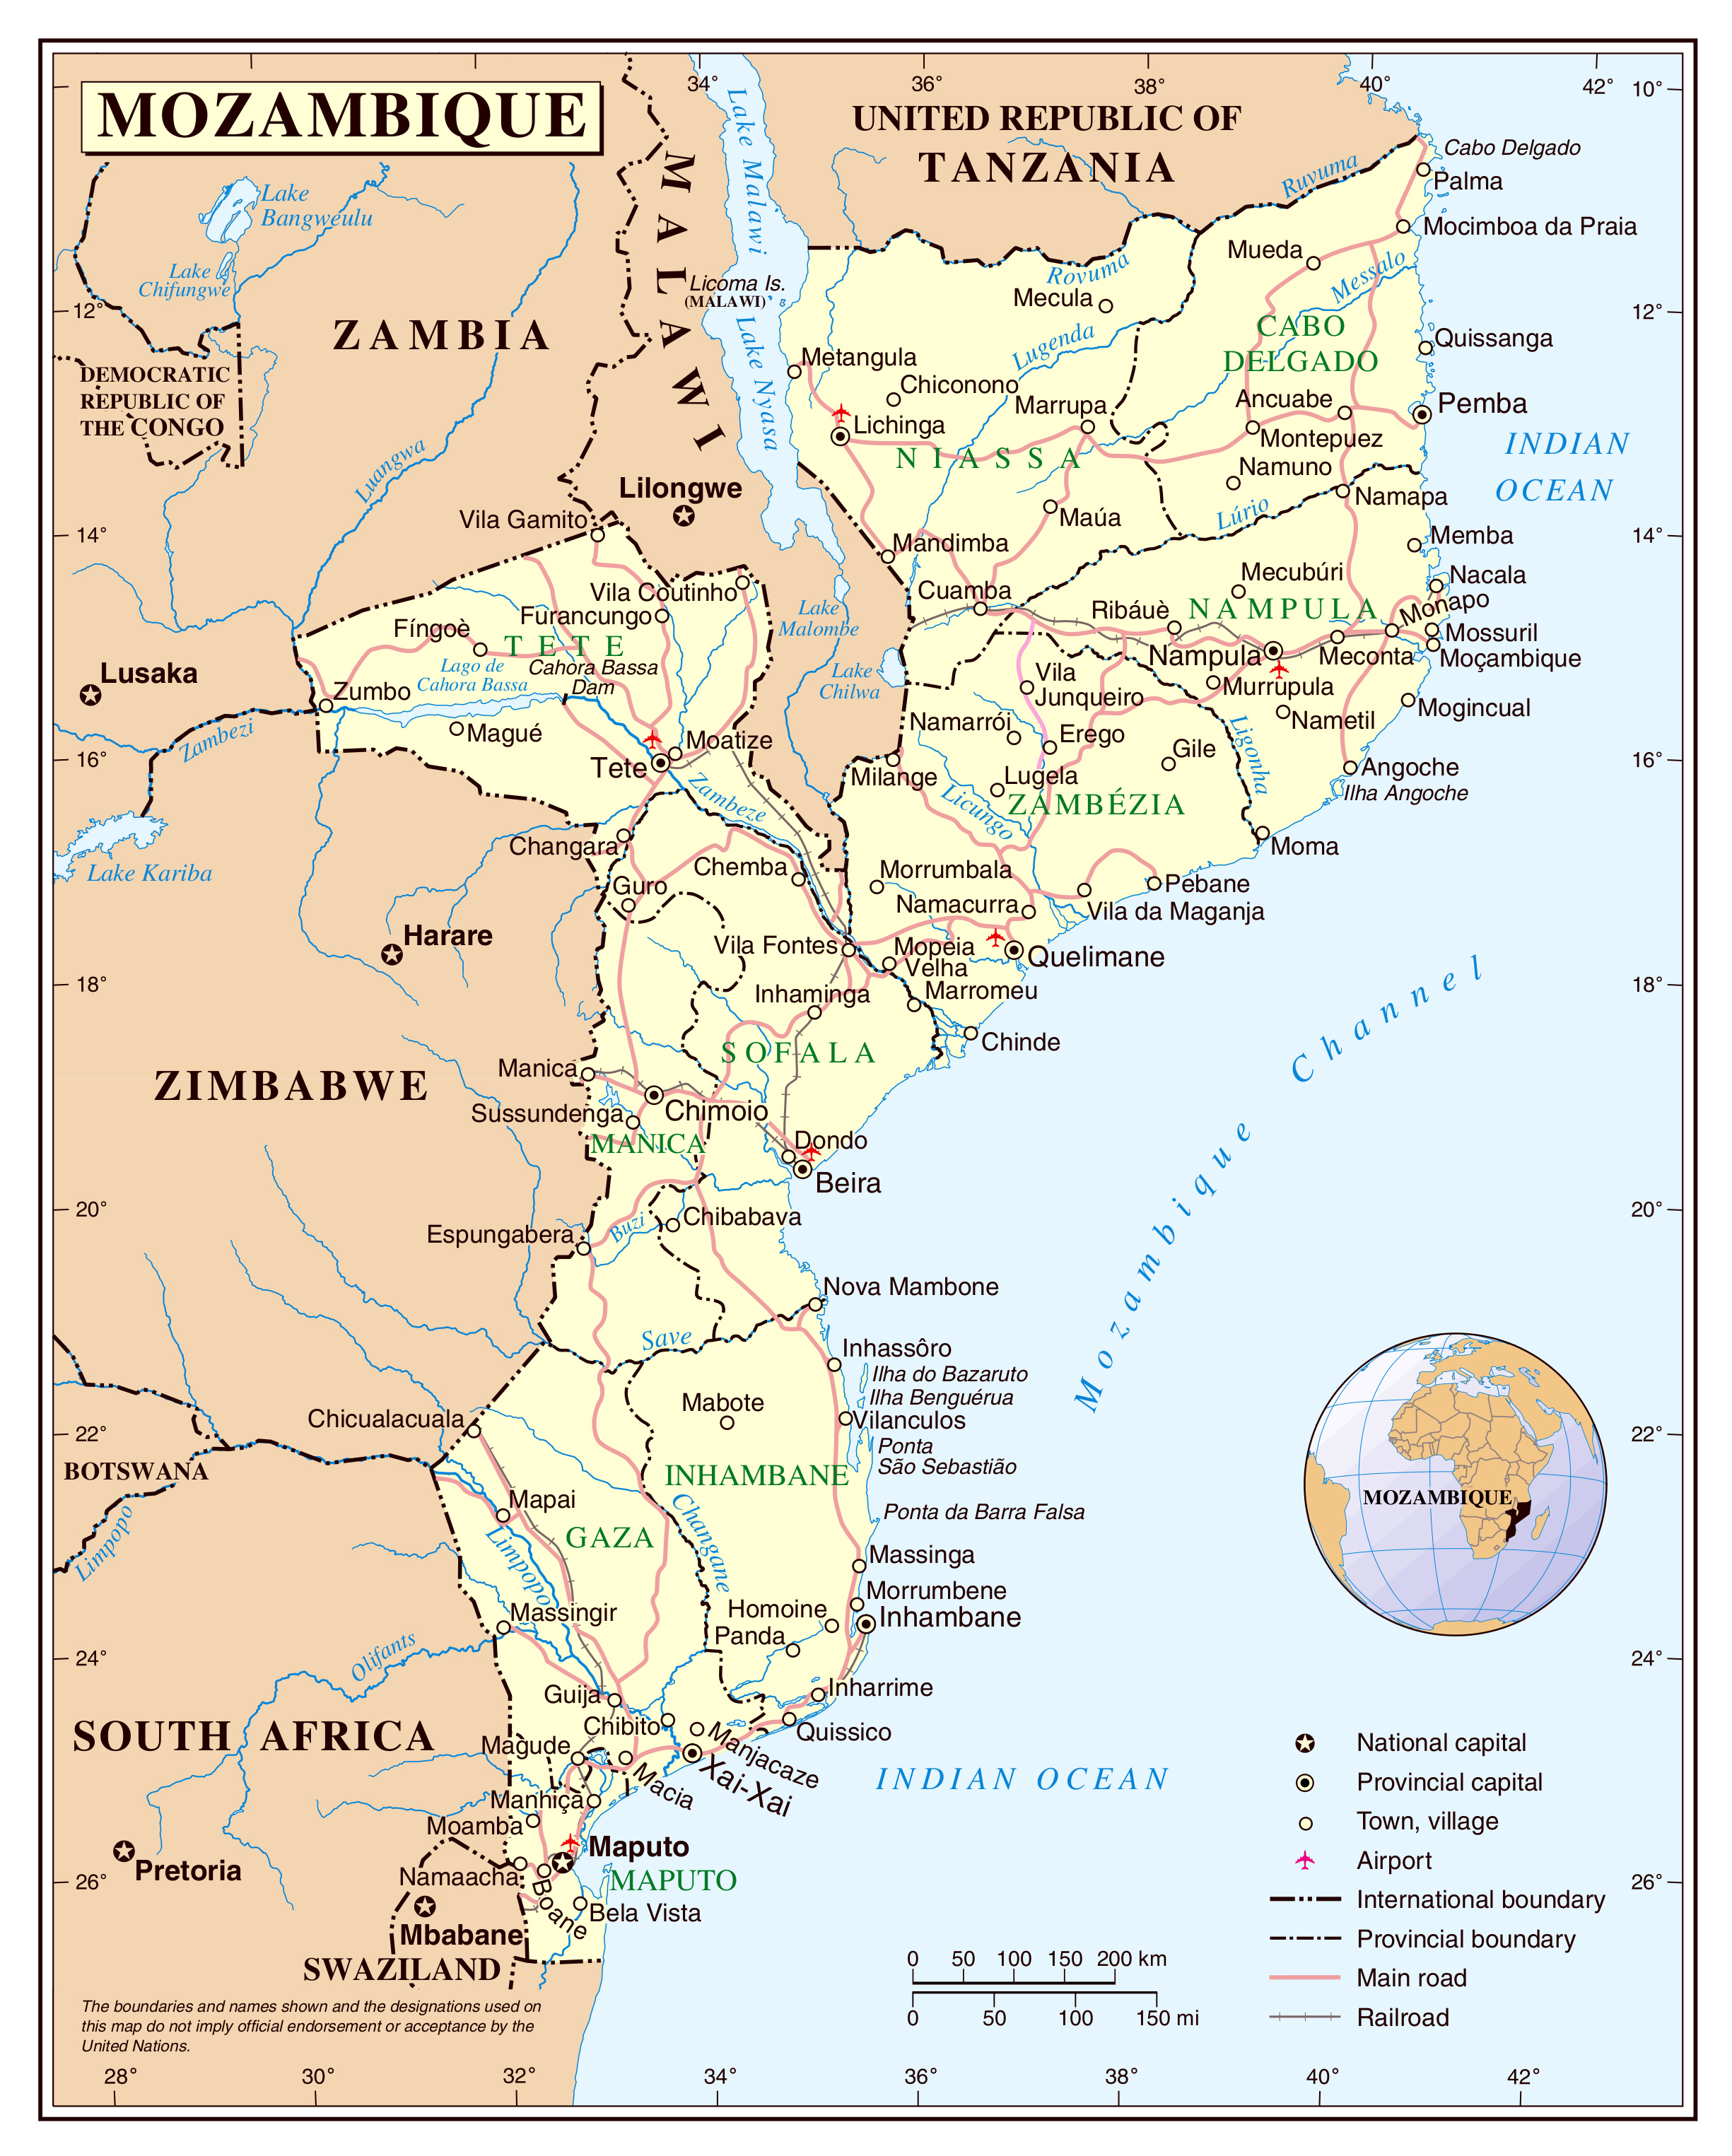 Large Detailed Political And Administrative Map Of Mozambique With